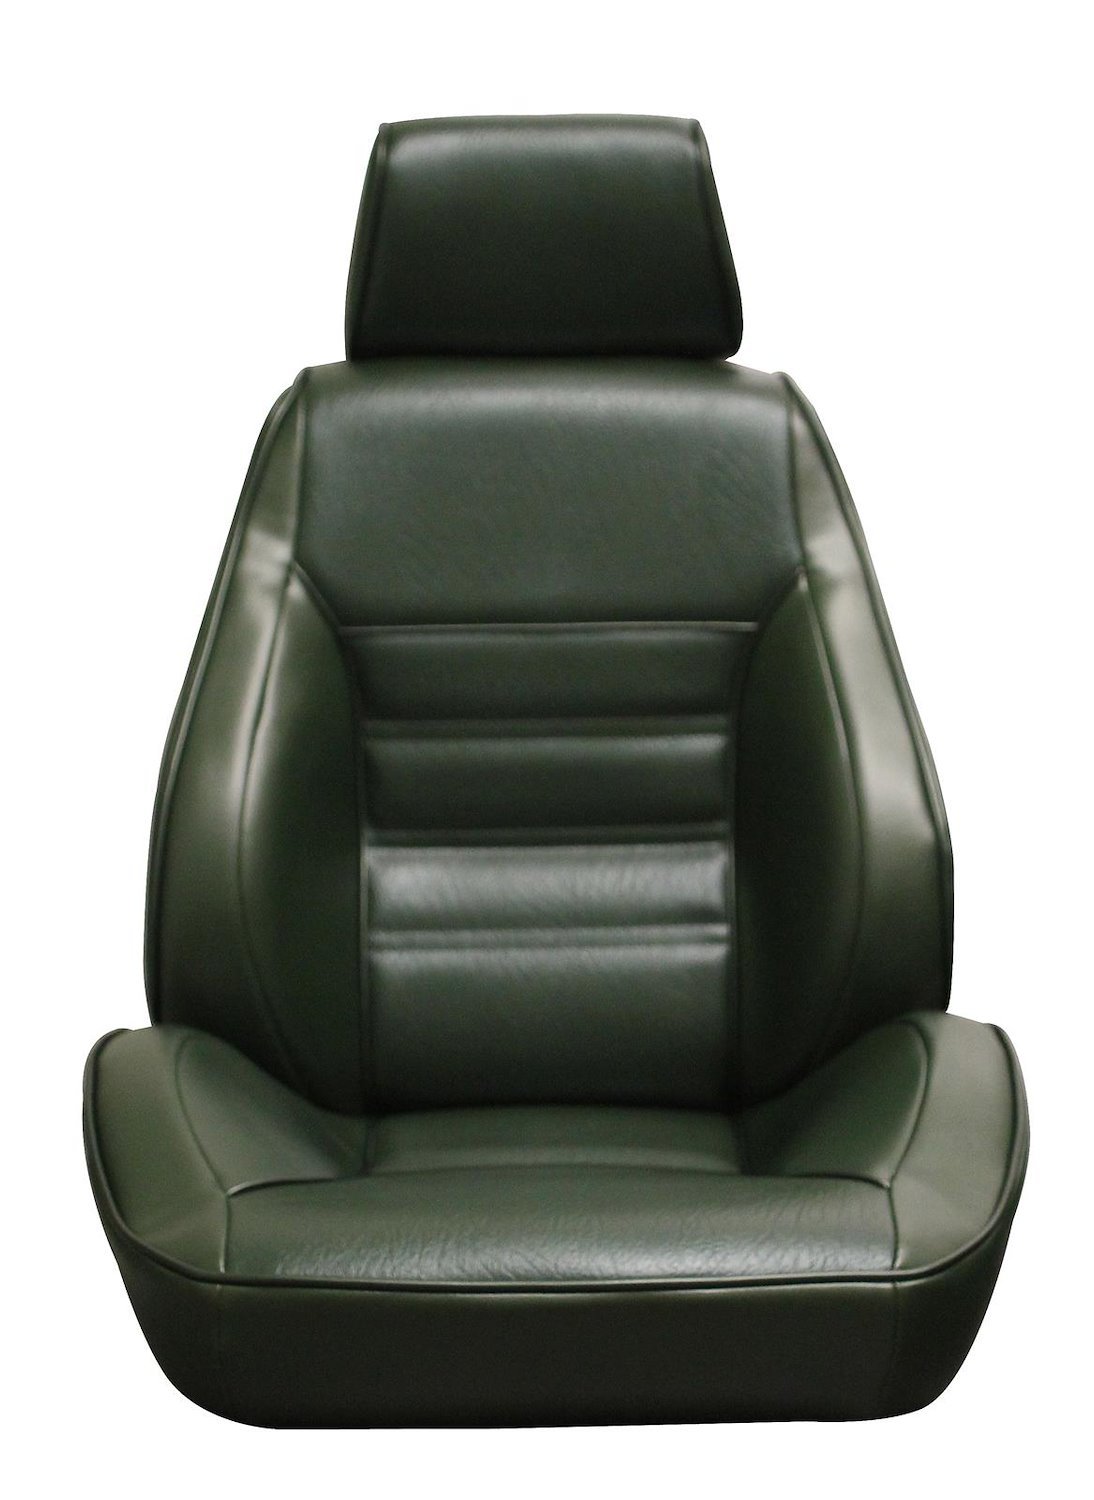 1971-1973 Ford Mustang Standard Interior Black Touring II Preassembled Reclining Front Bucket Seats